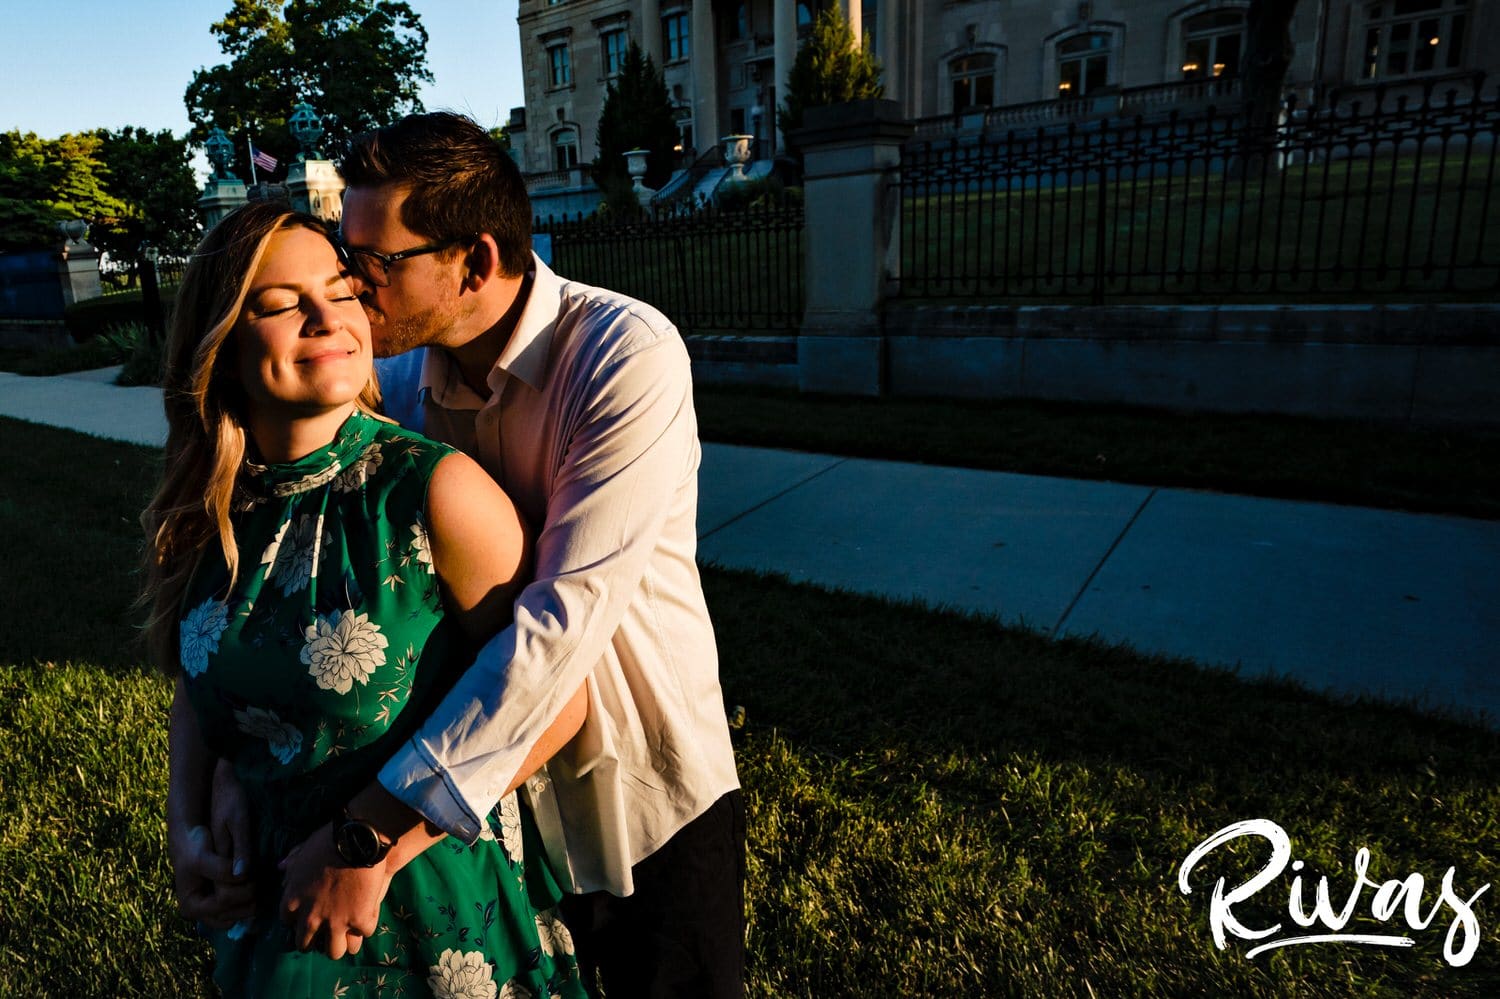 A warm, candid, intimate photo of a man embracing his fiance from behind as he kisses her on the cheek during their summer sunrise engagement session outside the Kansas City Museum.